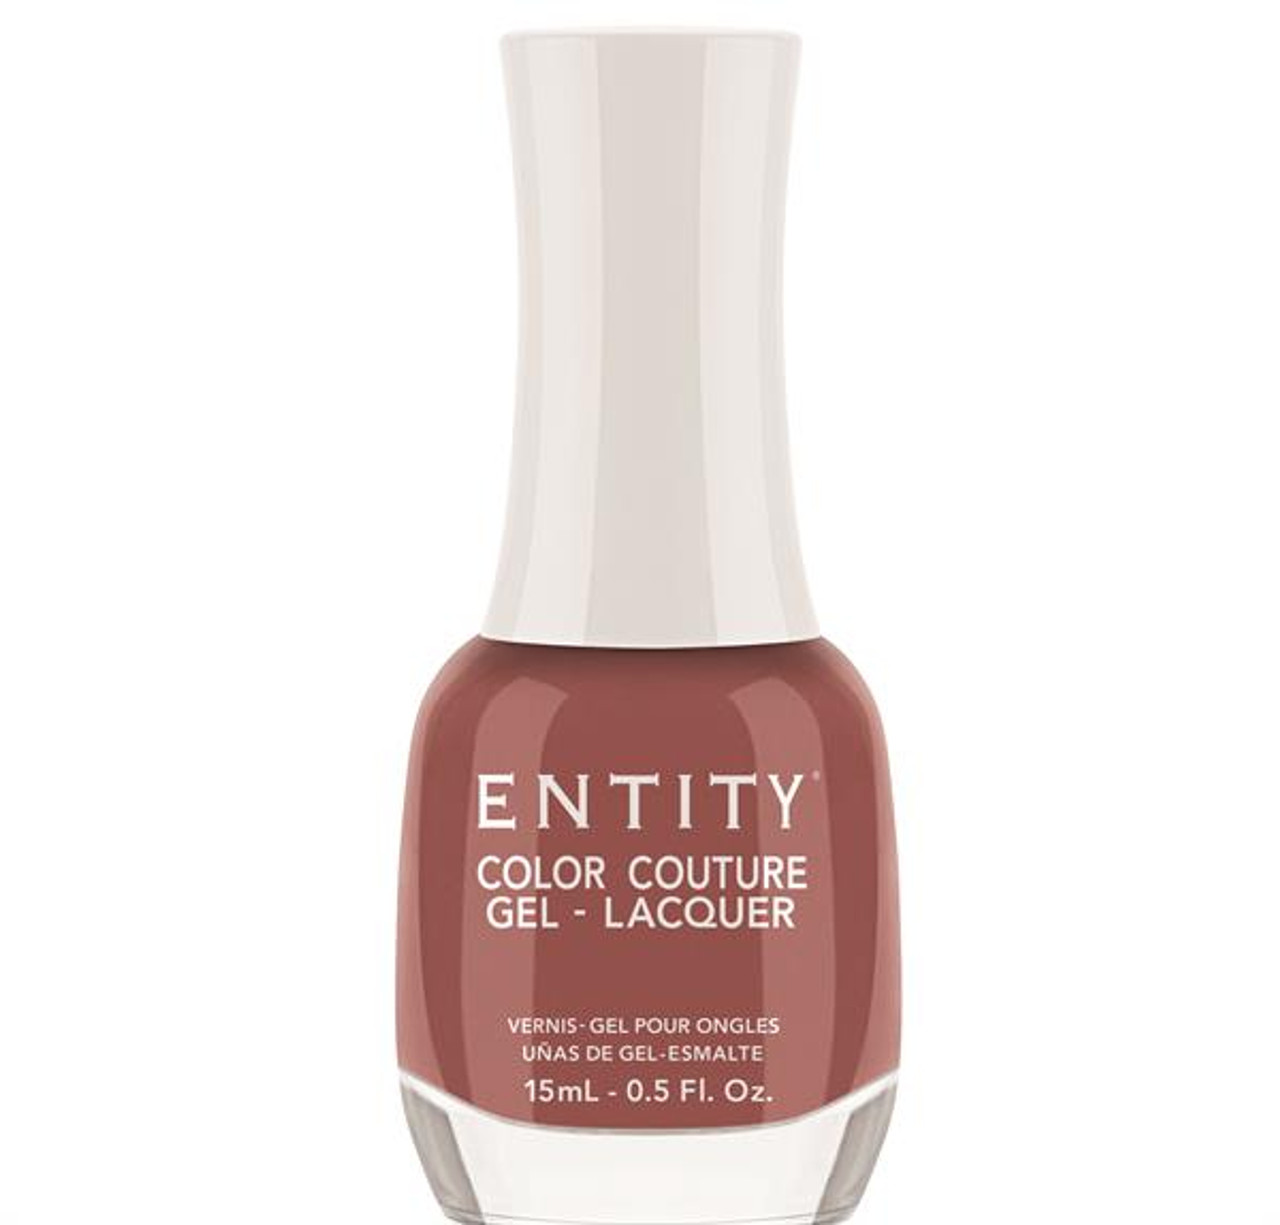 Entity Color Couture Gel-Lacquer CLASSY NOT BRASSY - 15 mL / .5 fl oz